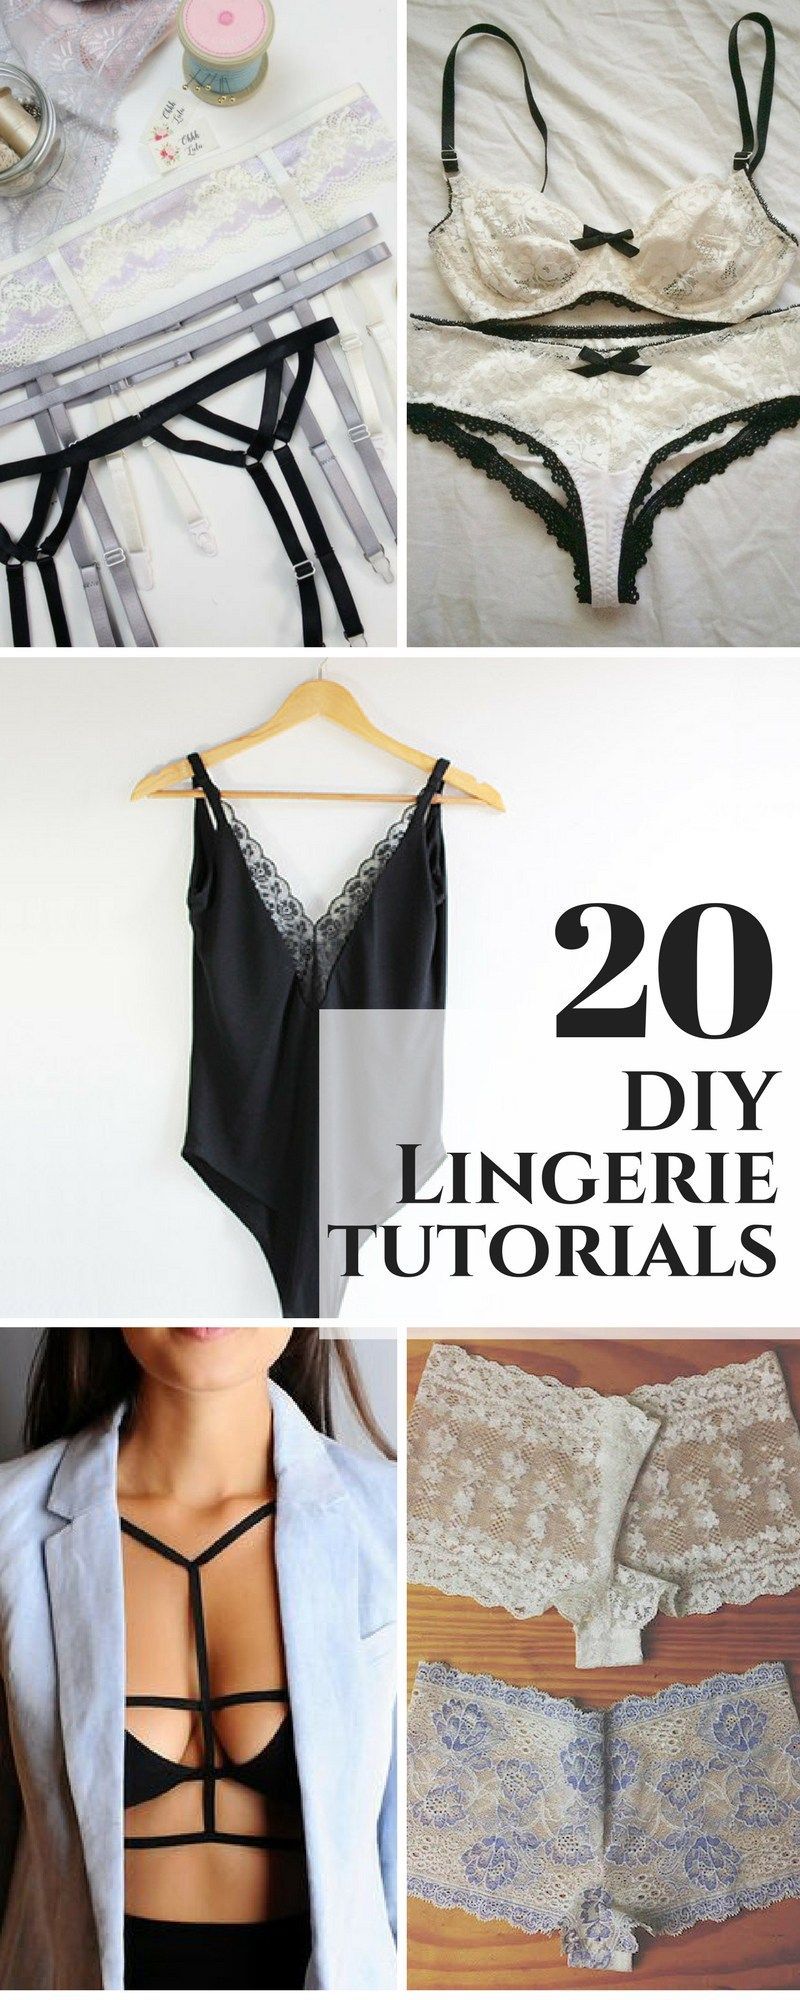 15 DIY Lingerie, Bras, and Panties to Try in 2019 -   20 DIY Clothes Projects
 ideas